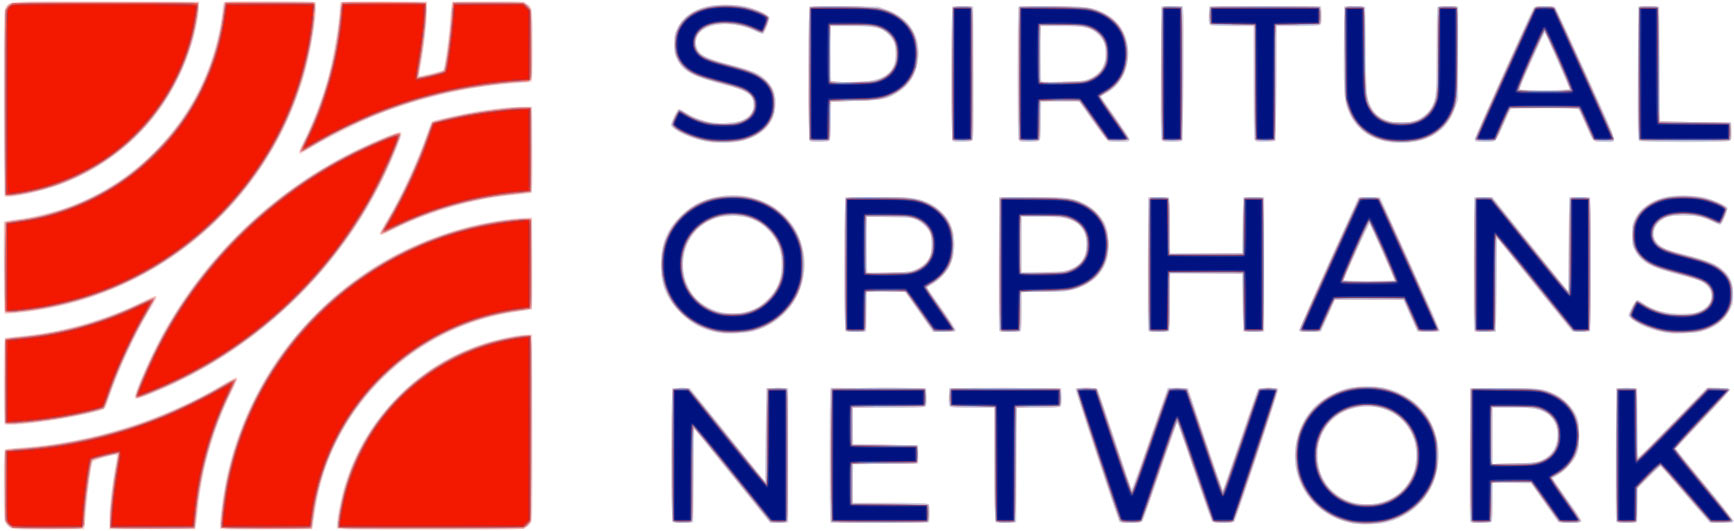 Logo with red design at left, words Spiritual Orphans Netword at right